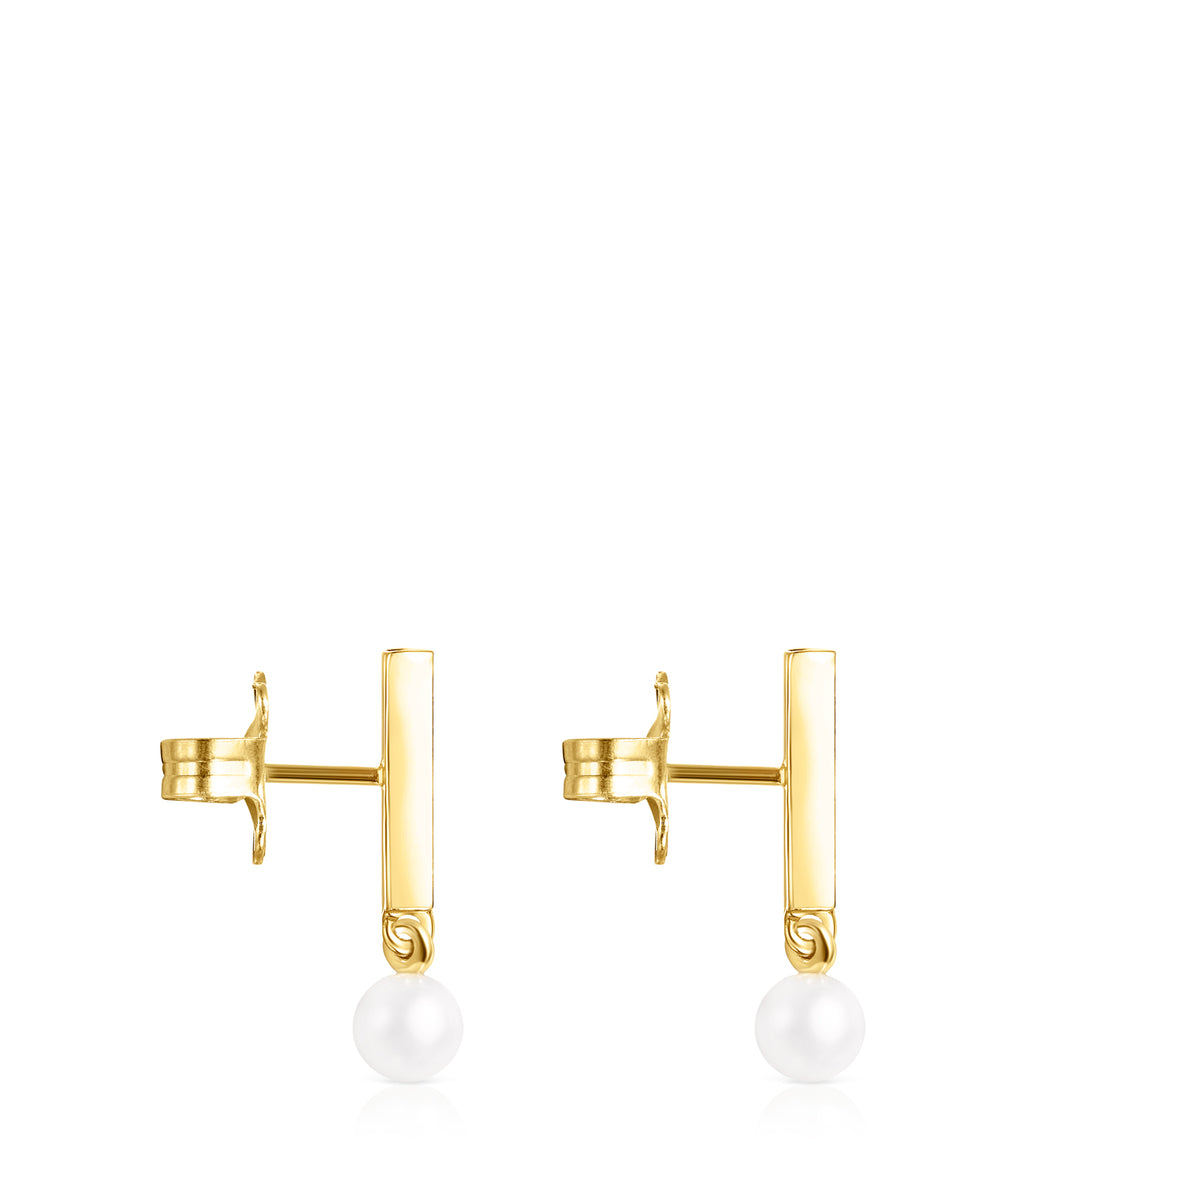 Tous Nocturne bar Earrings in Gold Vermeil with Diamonds and Pearl 918443740